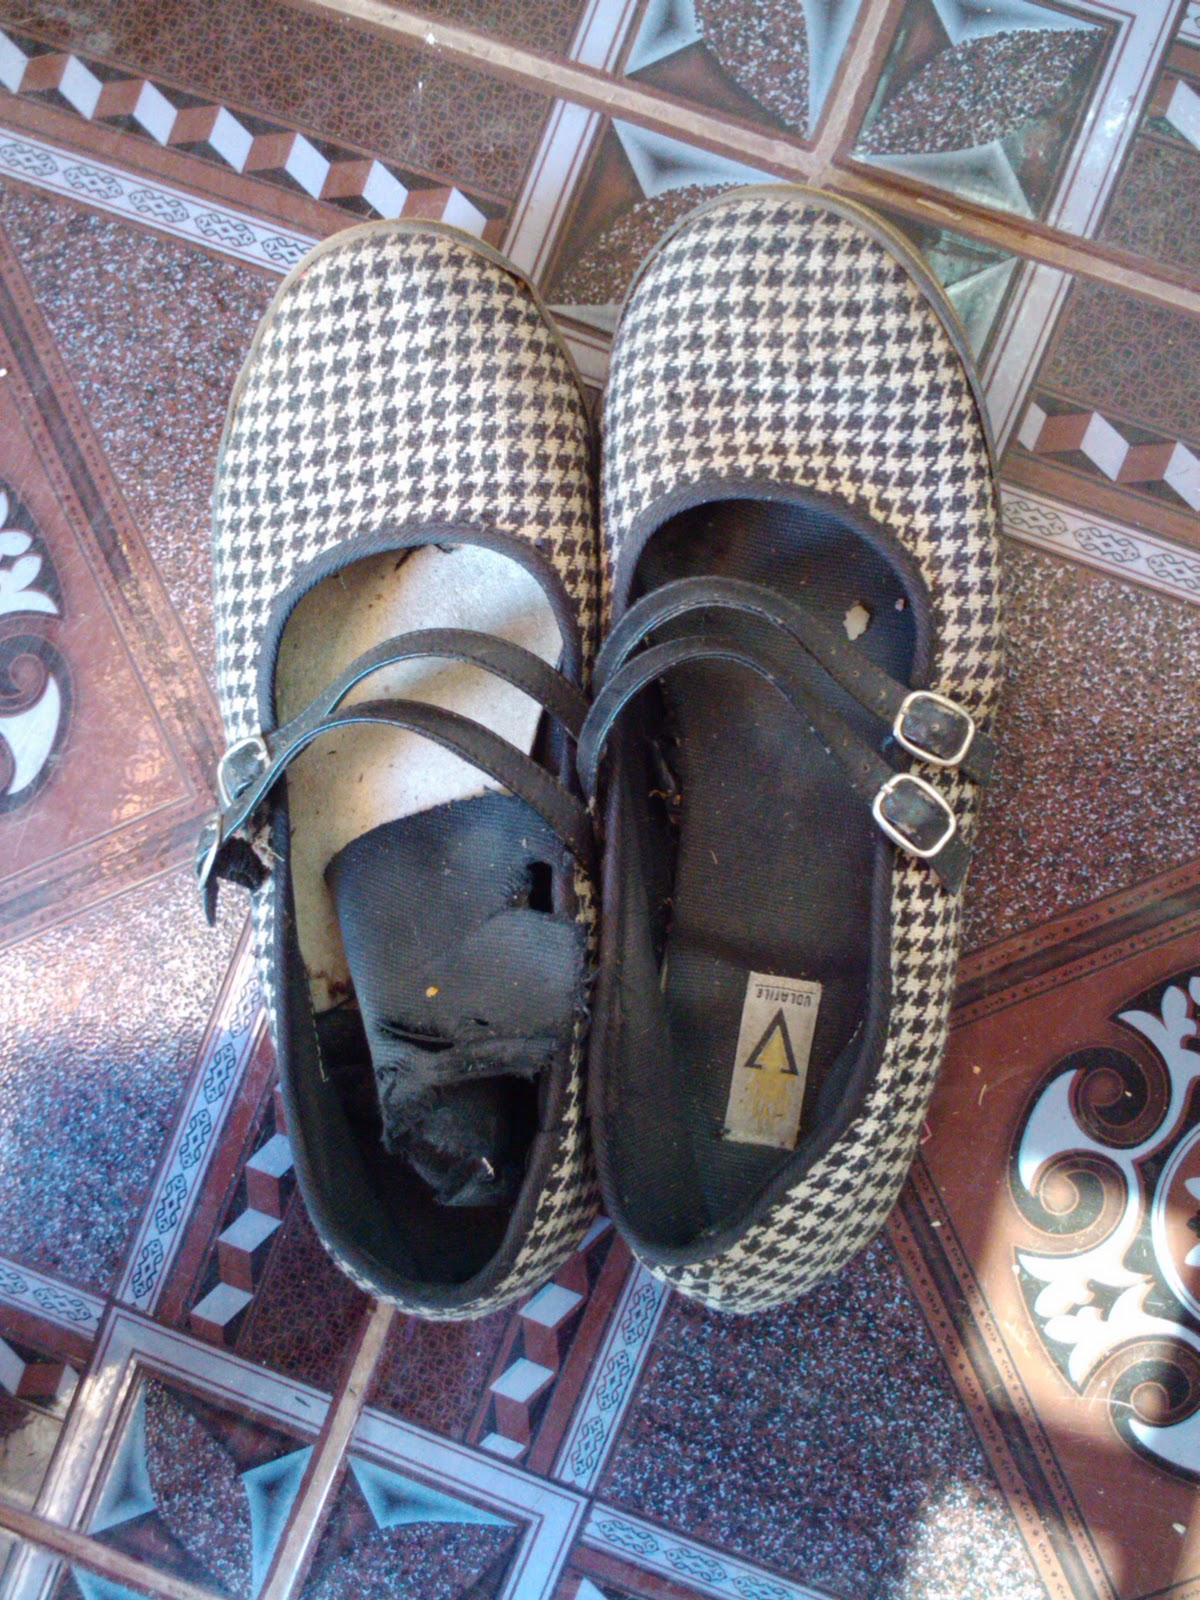 The Married Couple: Shoes in Cambodia